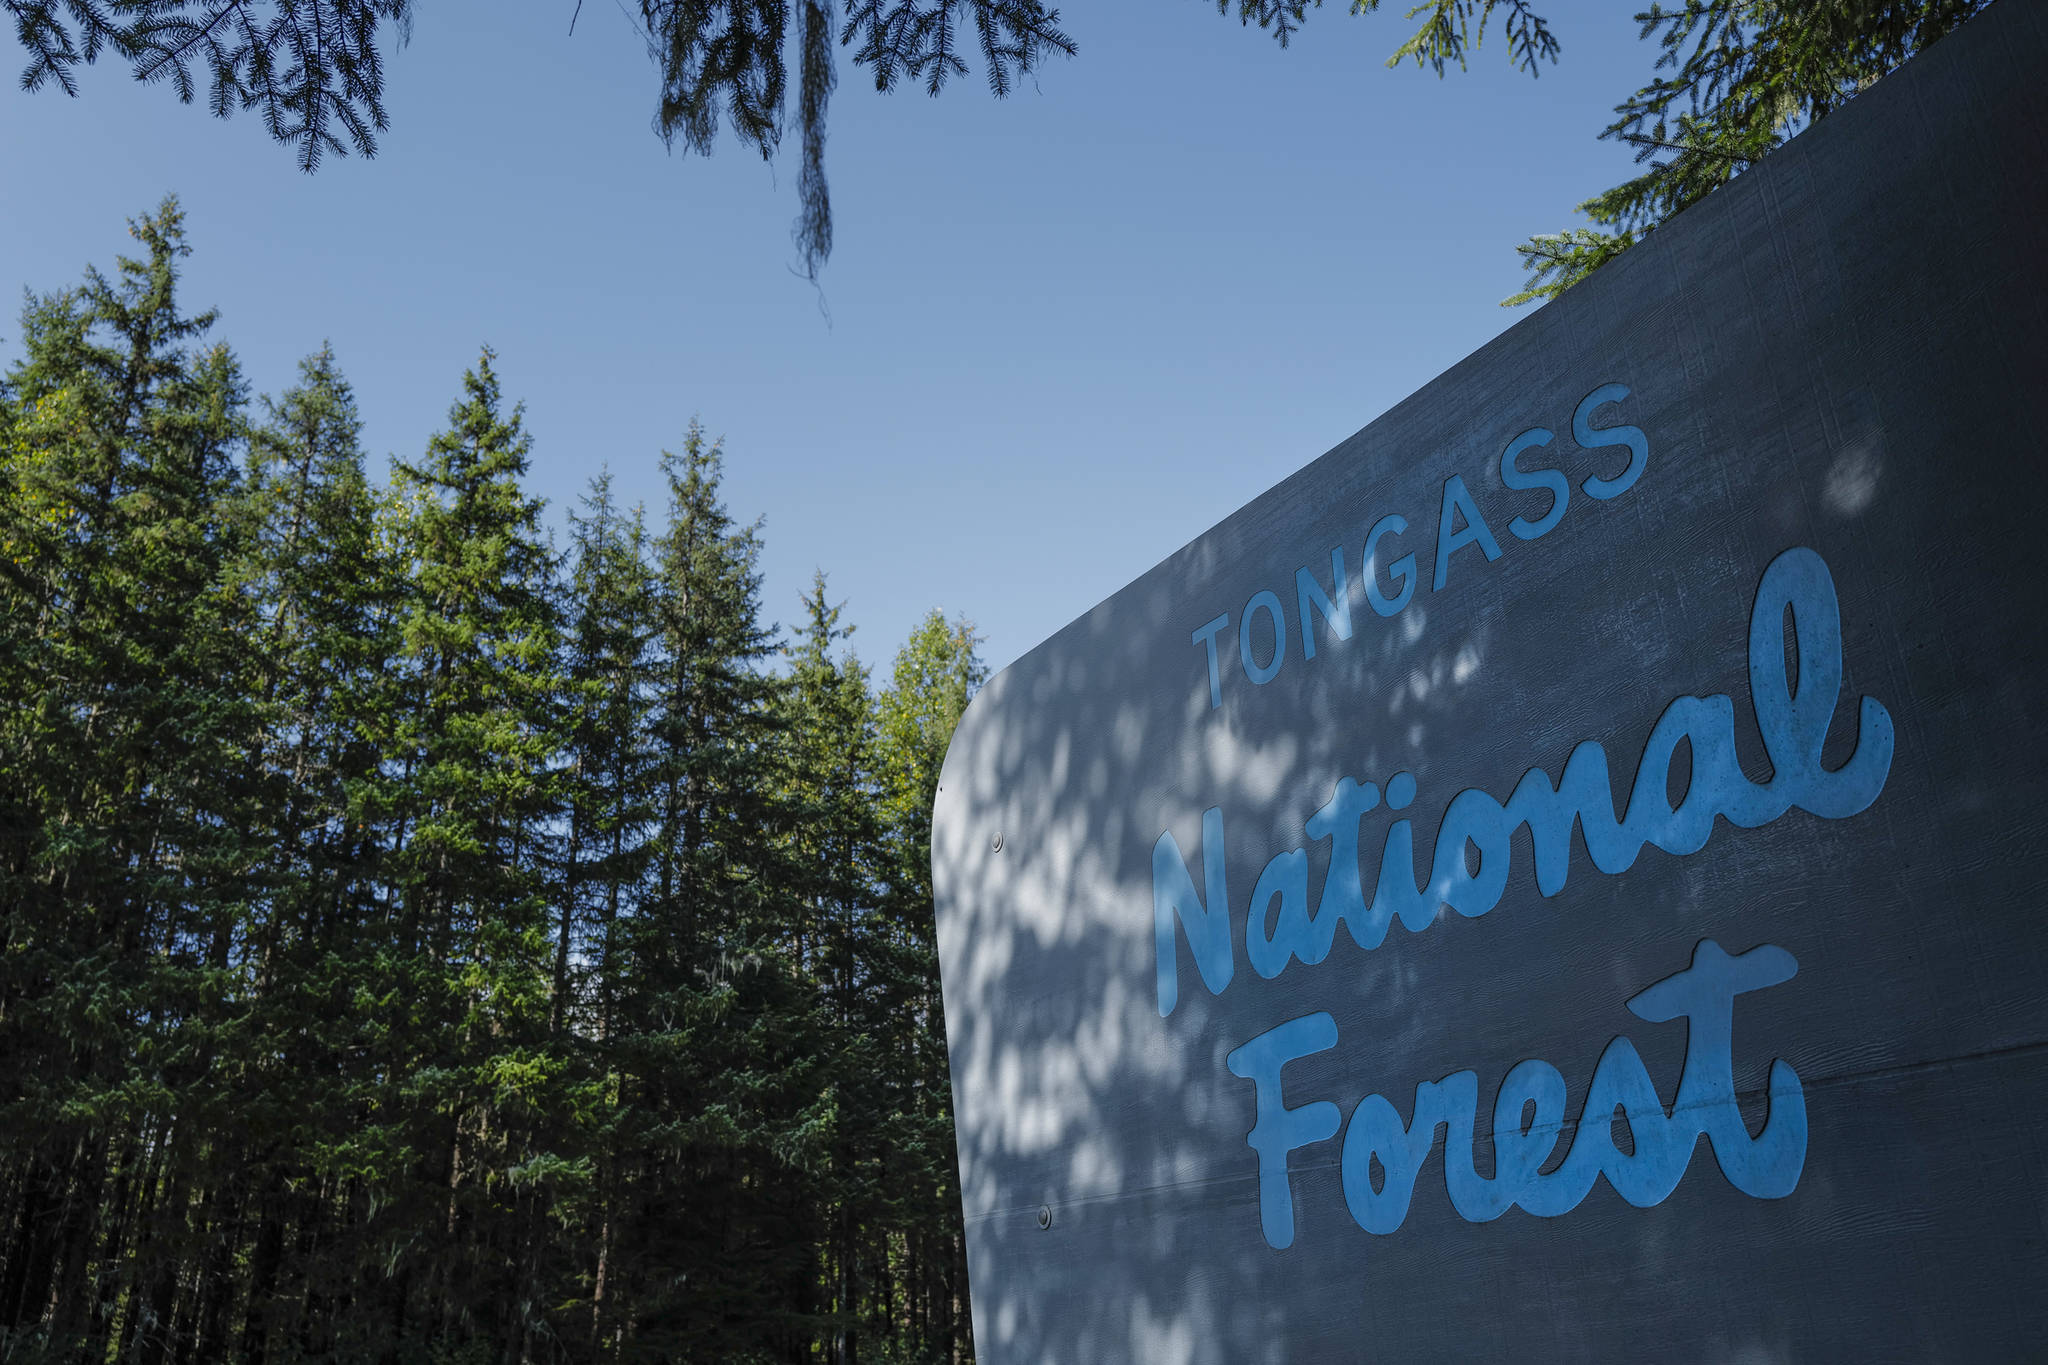 The Tongass National Forest sign on the way to the Mendenhall Glacier Visitor Center on Wednesday, Aug. 28, 2019. (Michael Penn | Juneau Empire)